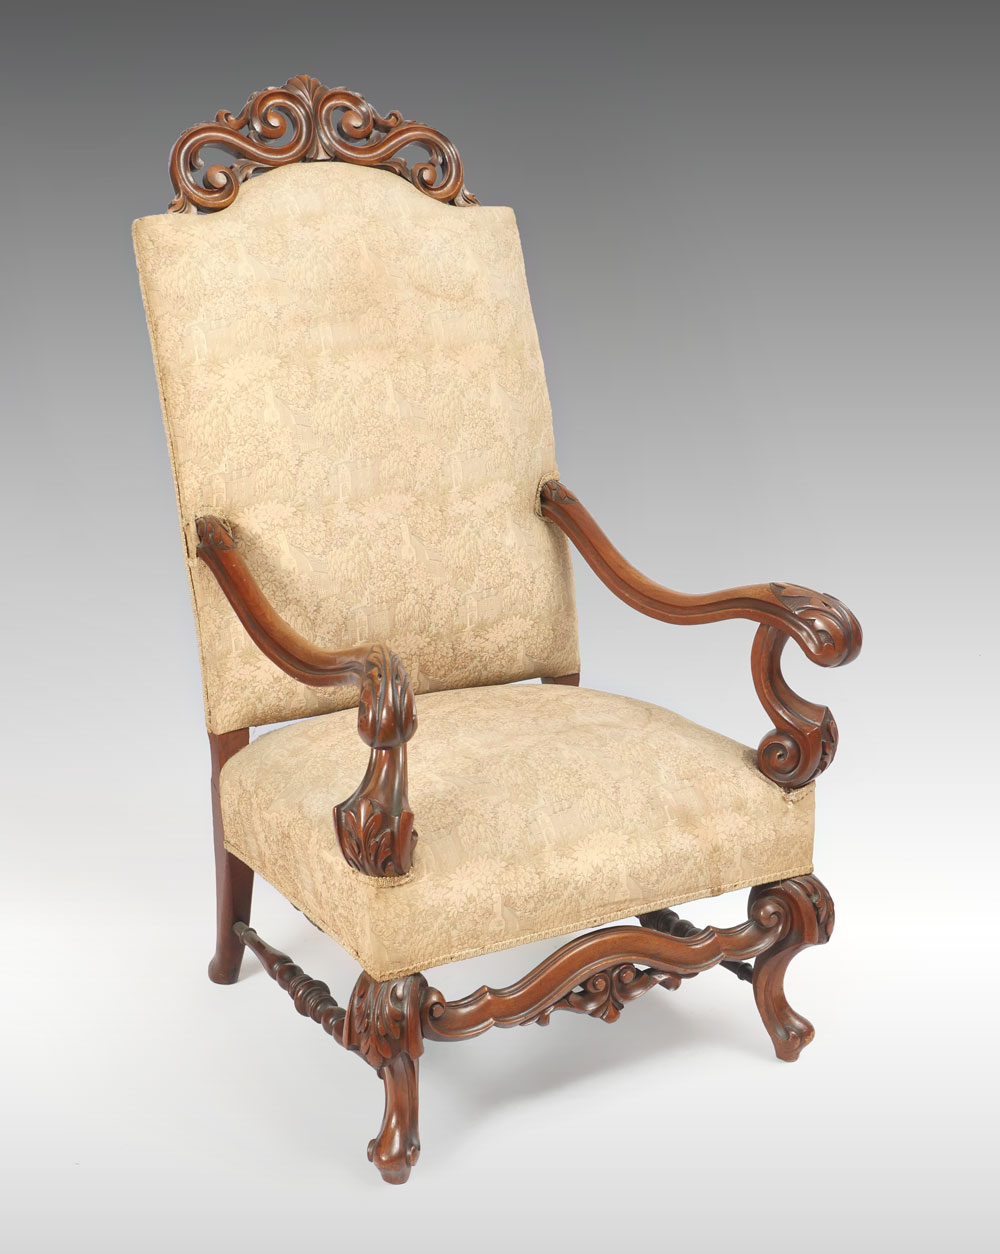 HIGHLY CARVED ARMCHAIR: Highly